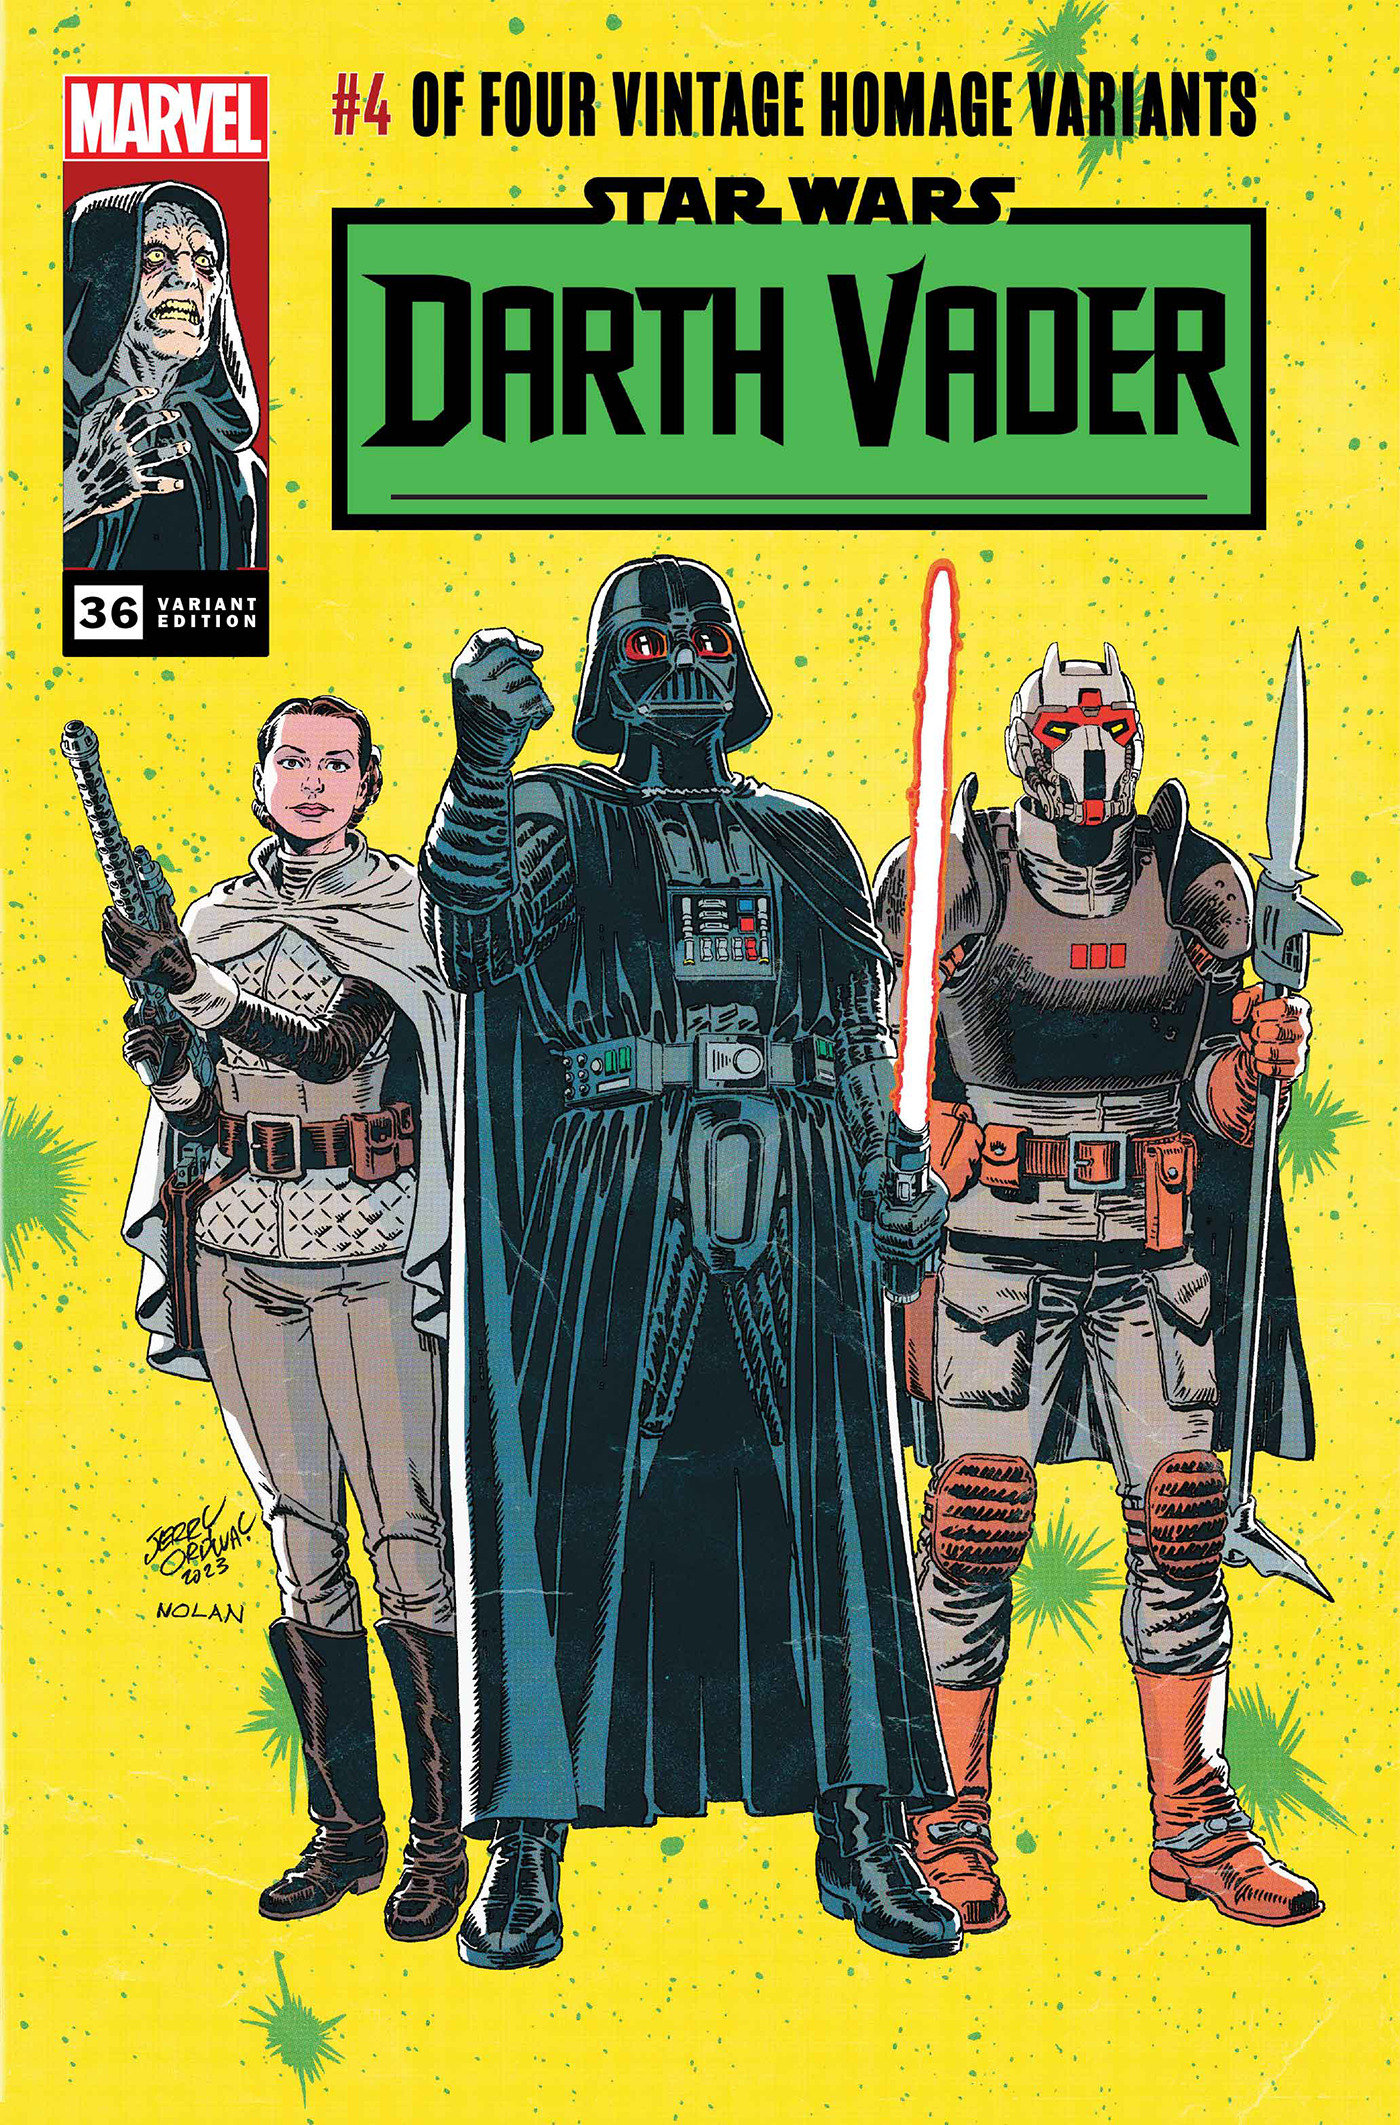 Star Wars: Darth Vader #36 Jerry Ordway Classic Trade Dress Variant